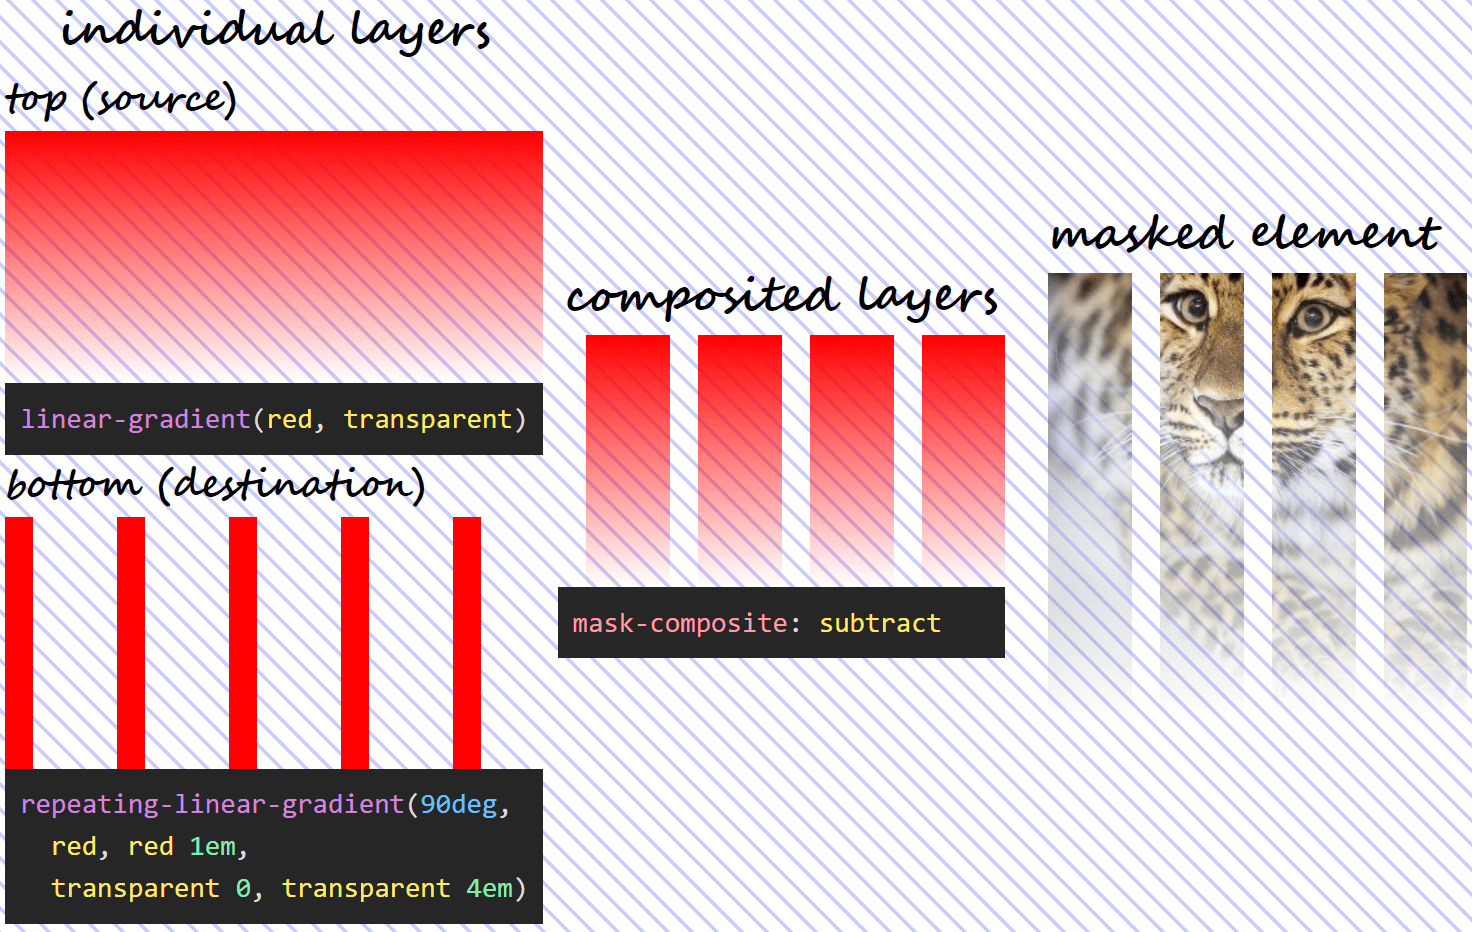 Three column illustration of mask-composite: subtract in action. On the first column, we have the individual gradient layers (both the visual results and the generating code). On the second column, we can see what the layer resulting as a result of compositing using the subtract operation looks like. And on the third column, we see this resulting mask layer applied on an image of an Amur leopard. Wherever the top (source) layer is fully opaque or the bottom (destination) layer is fully transparent, our image is fully transparent (completely masked out) as well.